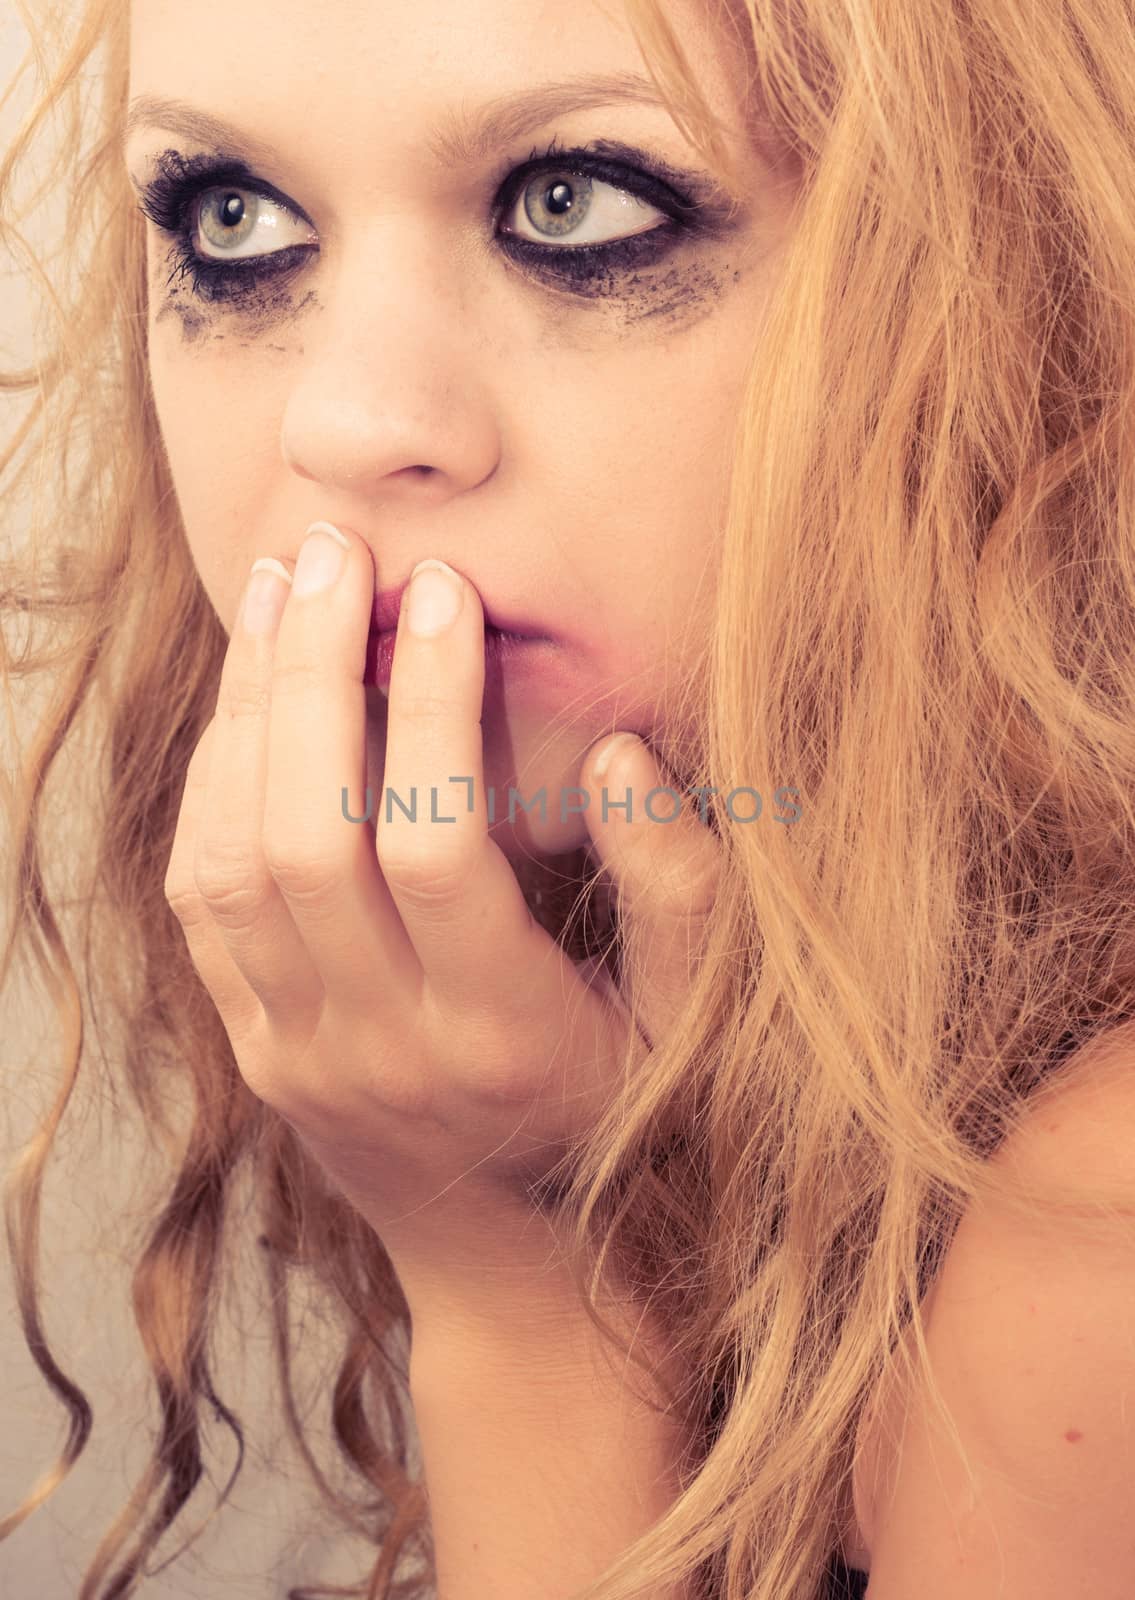 Sad blond girl with terrified expression closeup photo